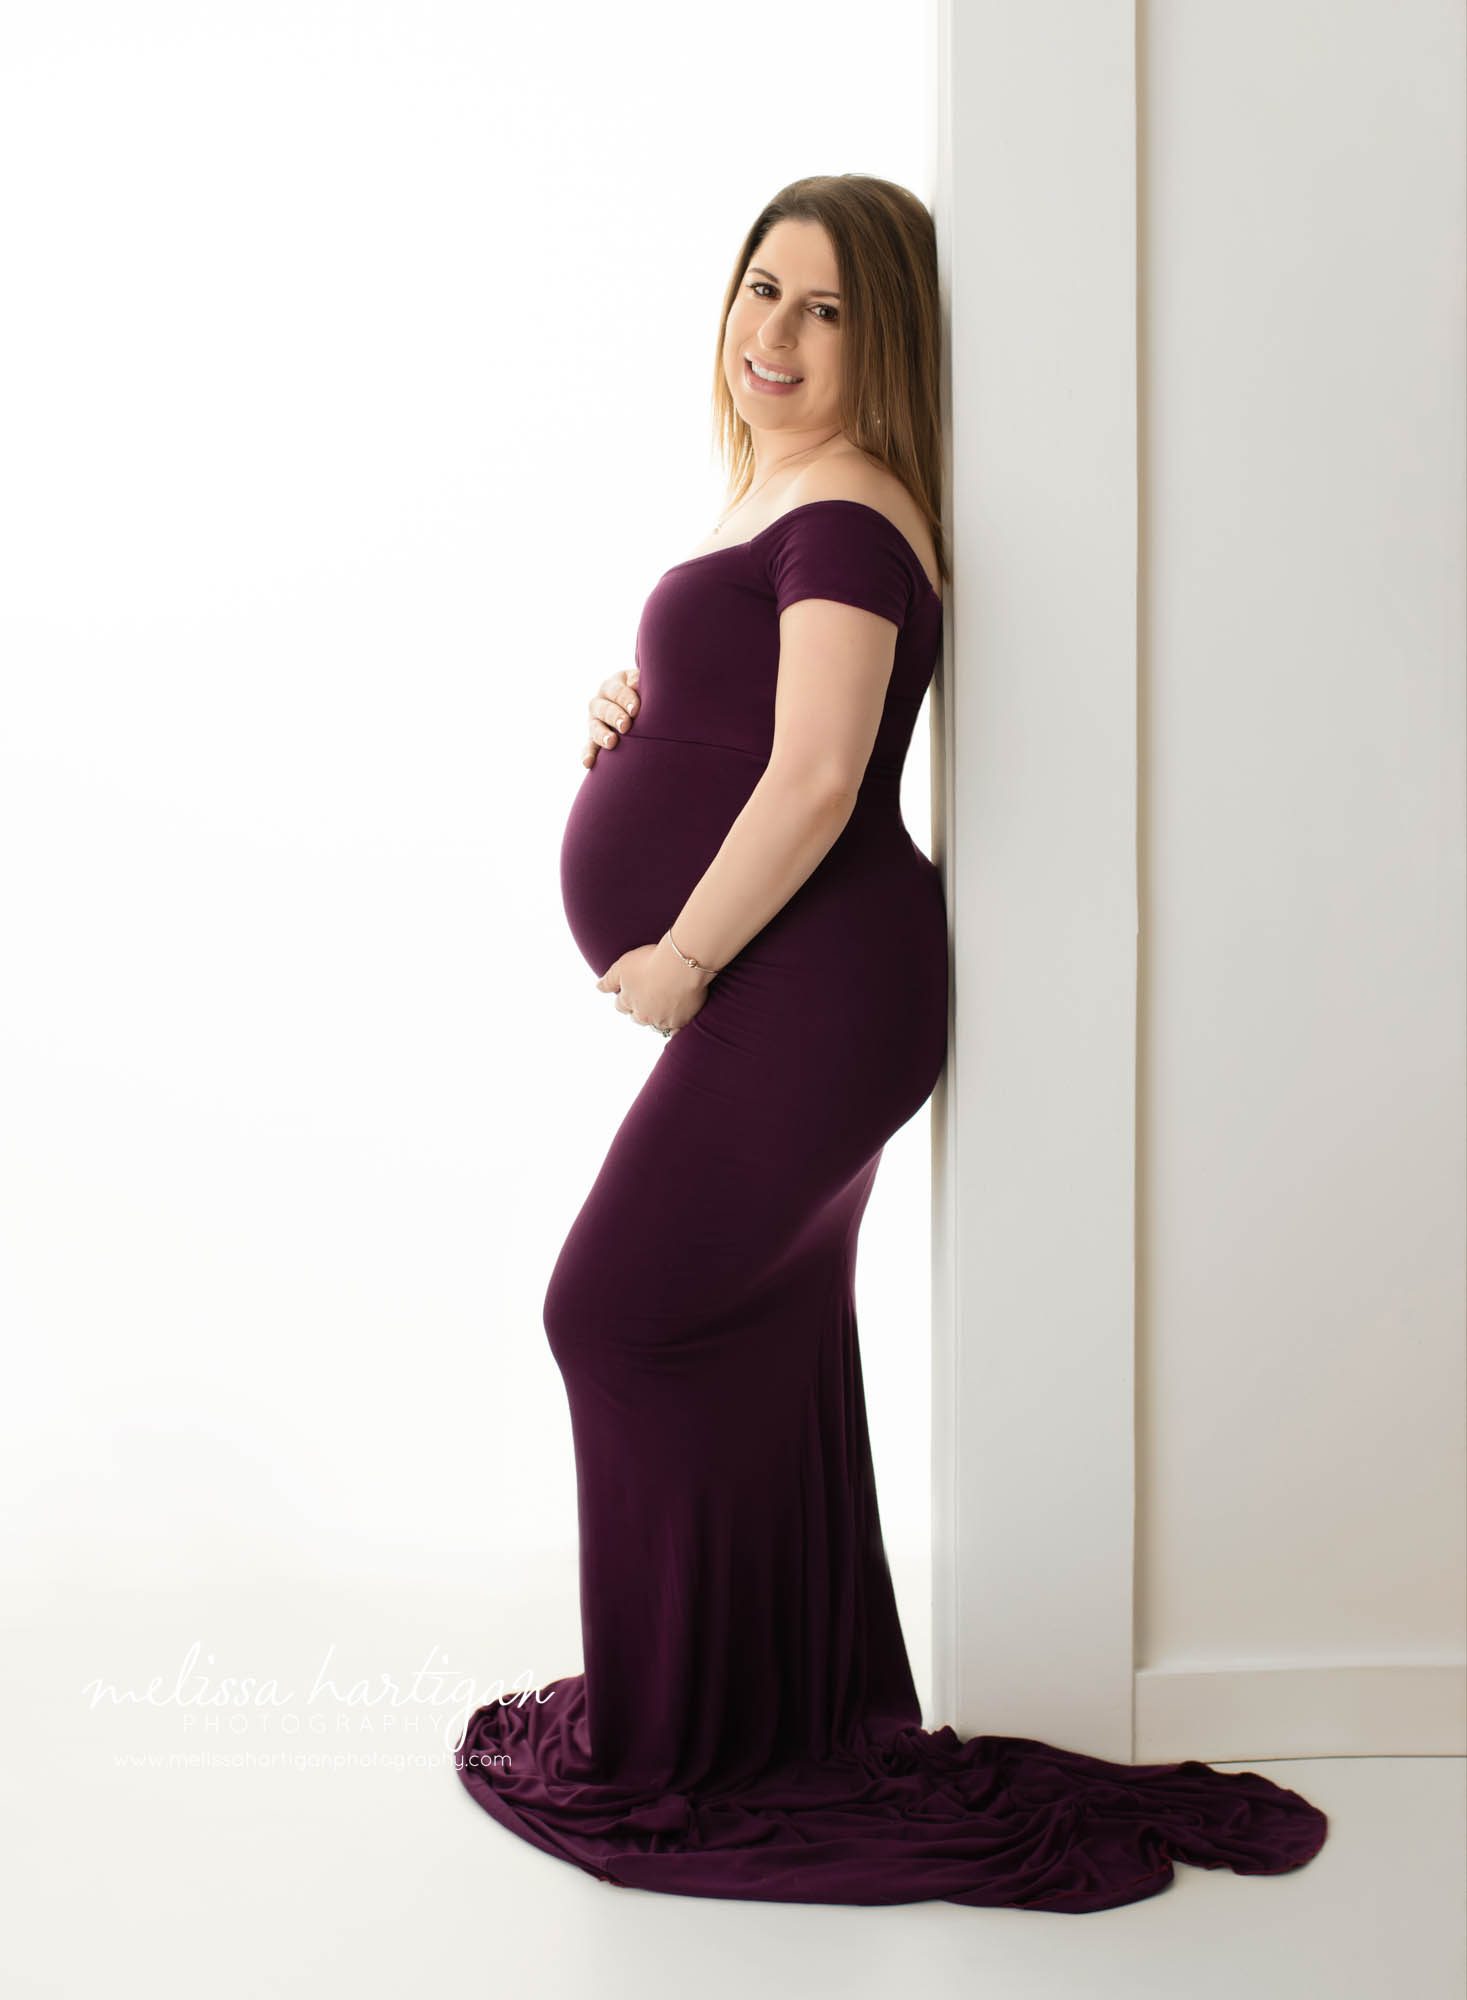 mom standing holding baby bump wearing long eggplant purple form fitting maternity gown CT maternity photography